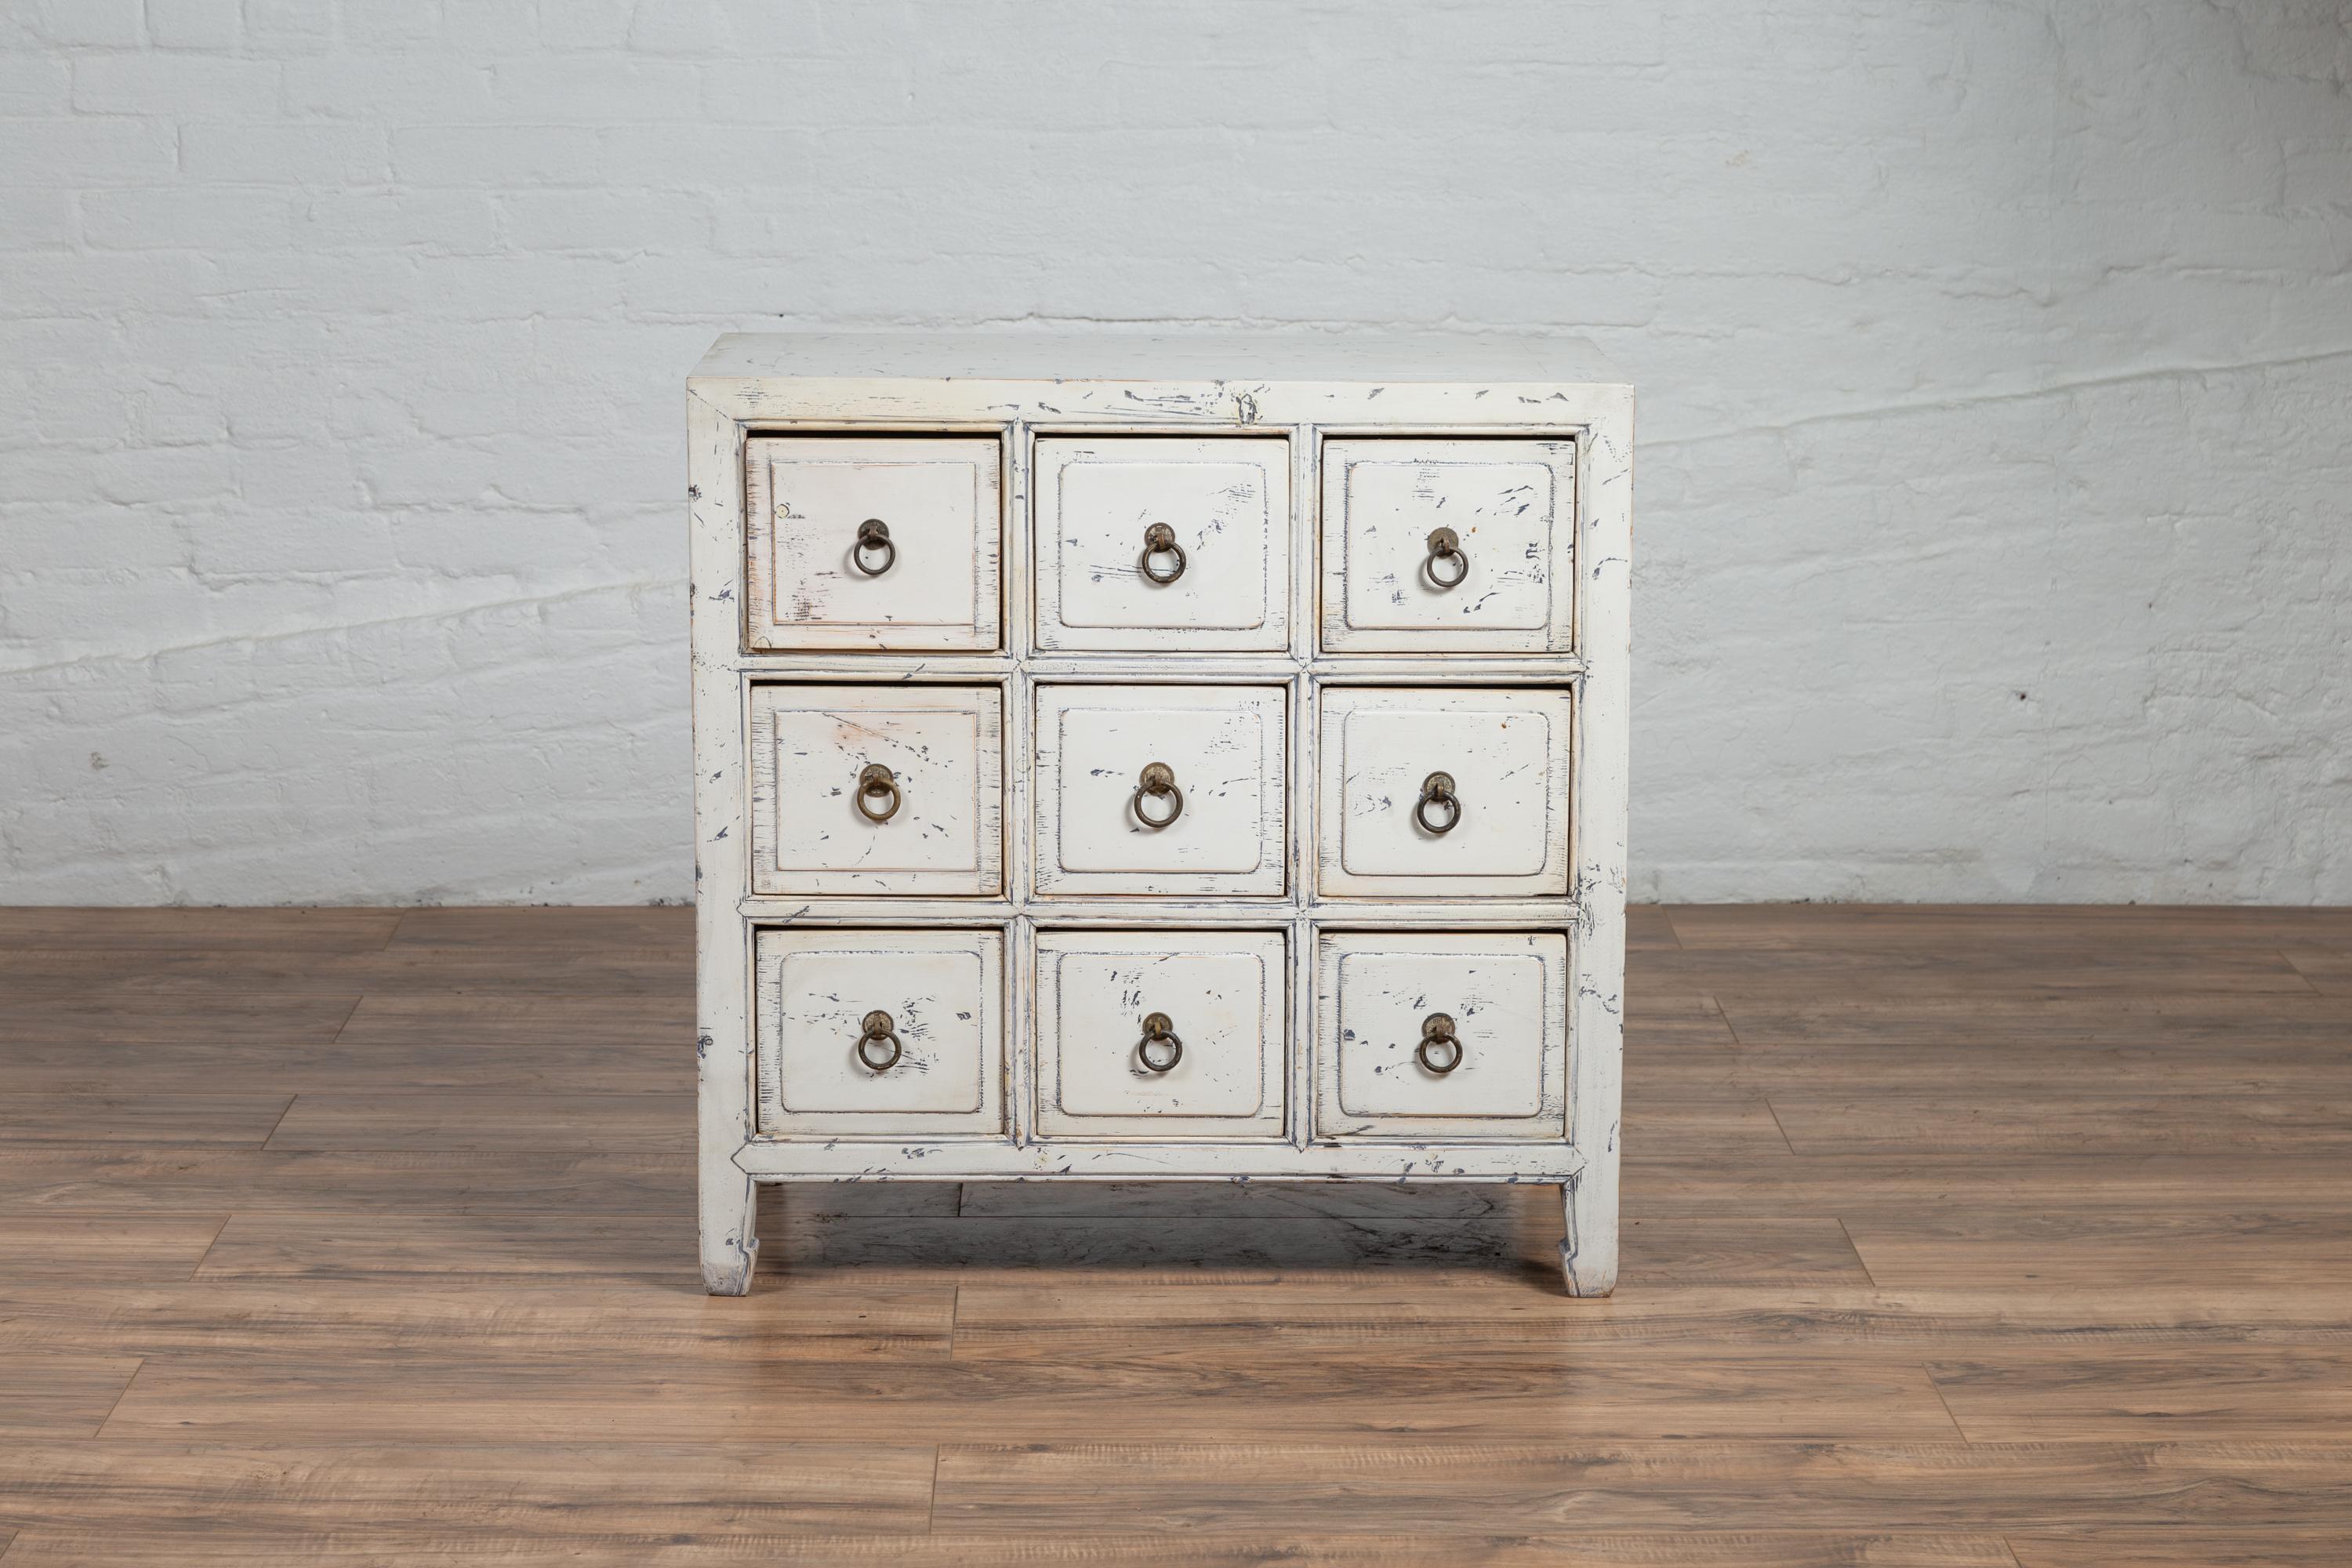 A vintage Chinese white painted nine-drawer apothecary chest from the mid-20th century, with distressed finish and black splatter. Born in China during the midcentury period, this charming apothecary chest features a rectangular top, sitting above a